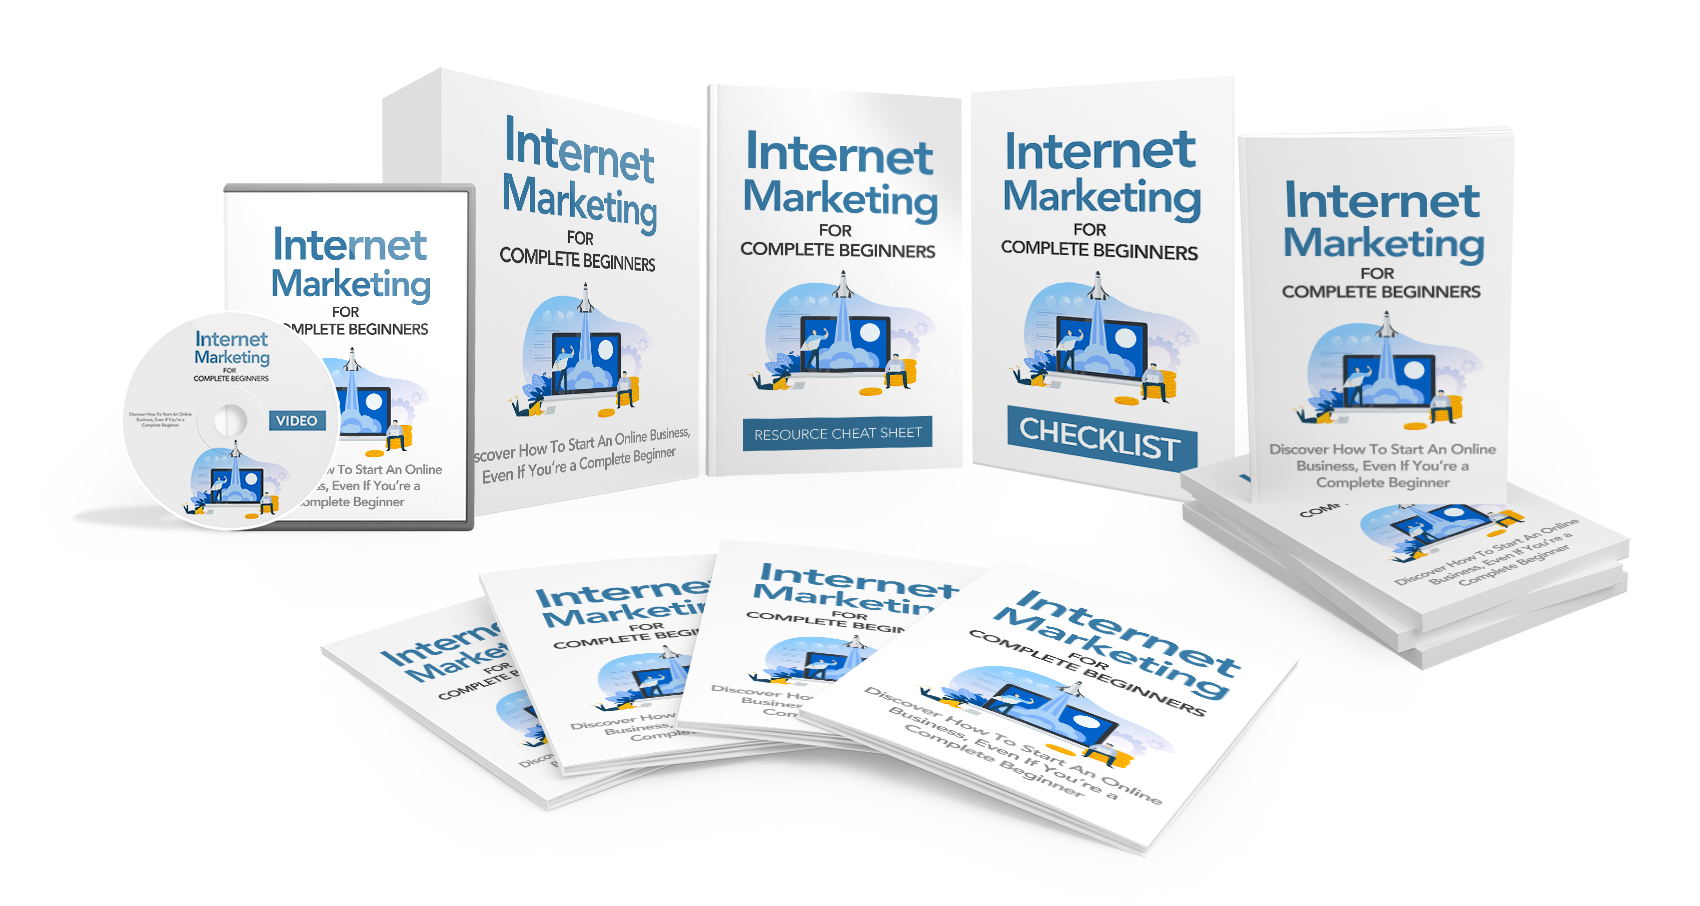 Internet Marketing For Complete Beginners (Video Course)